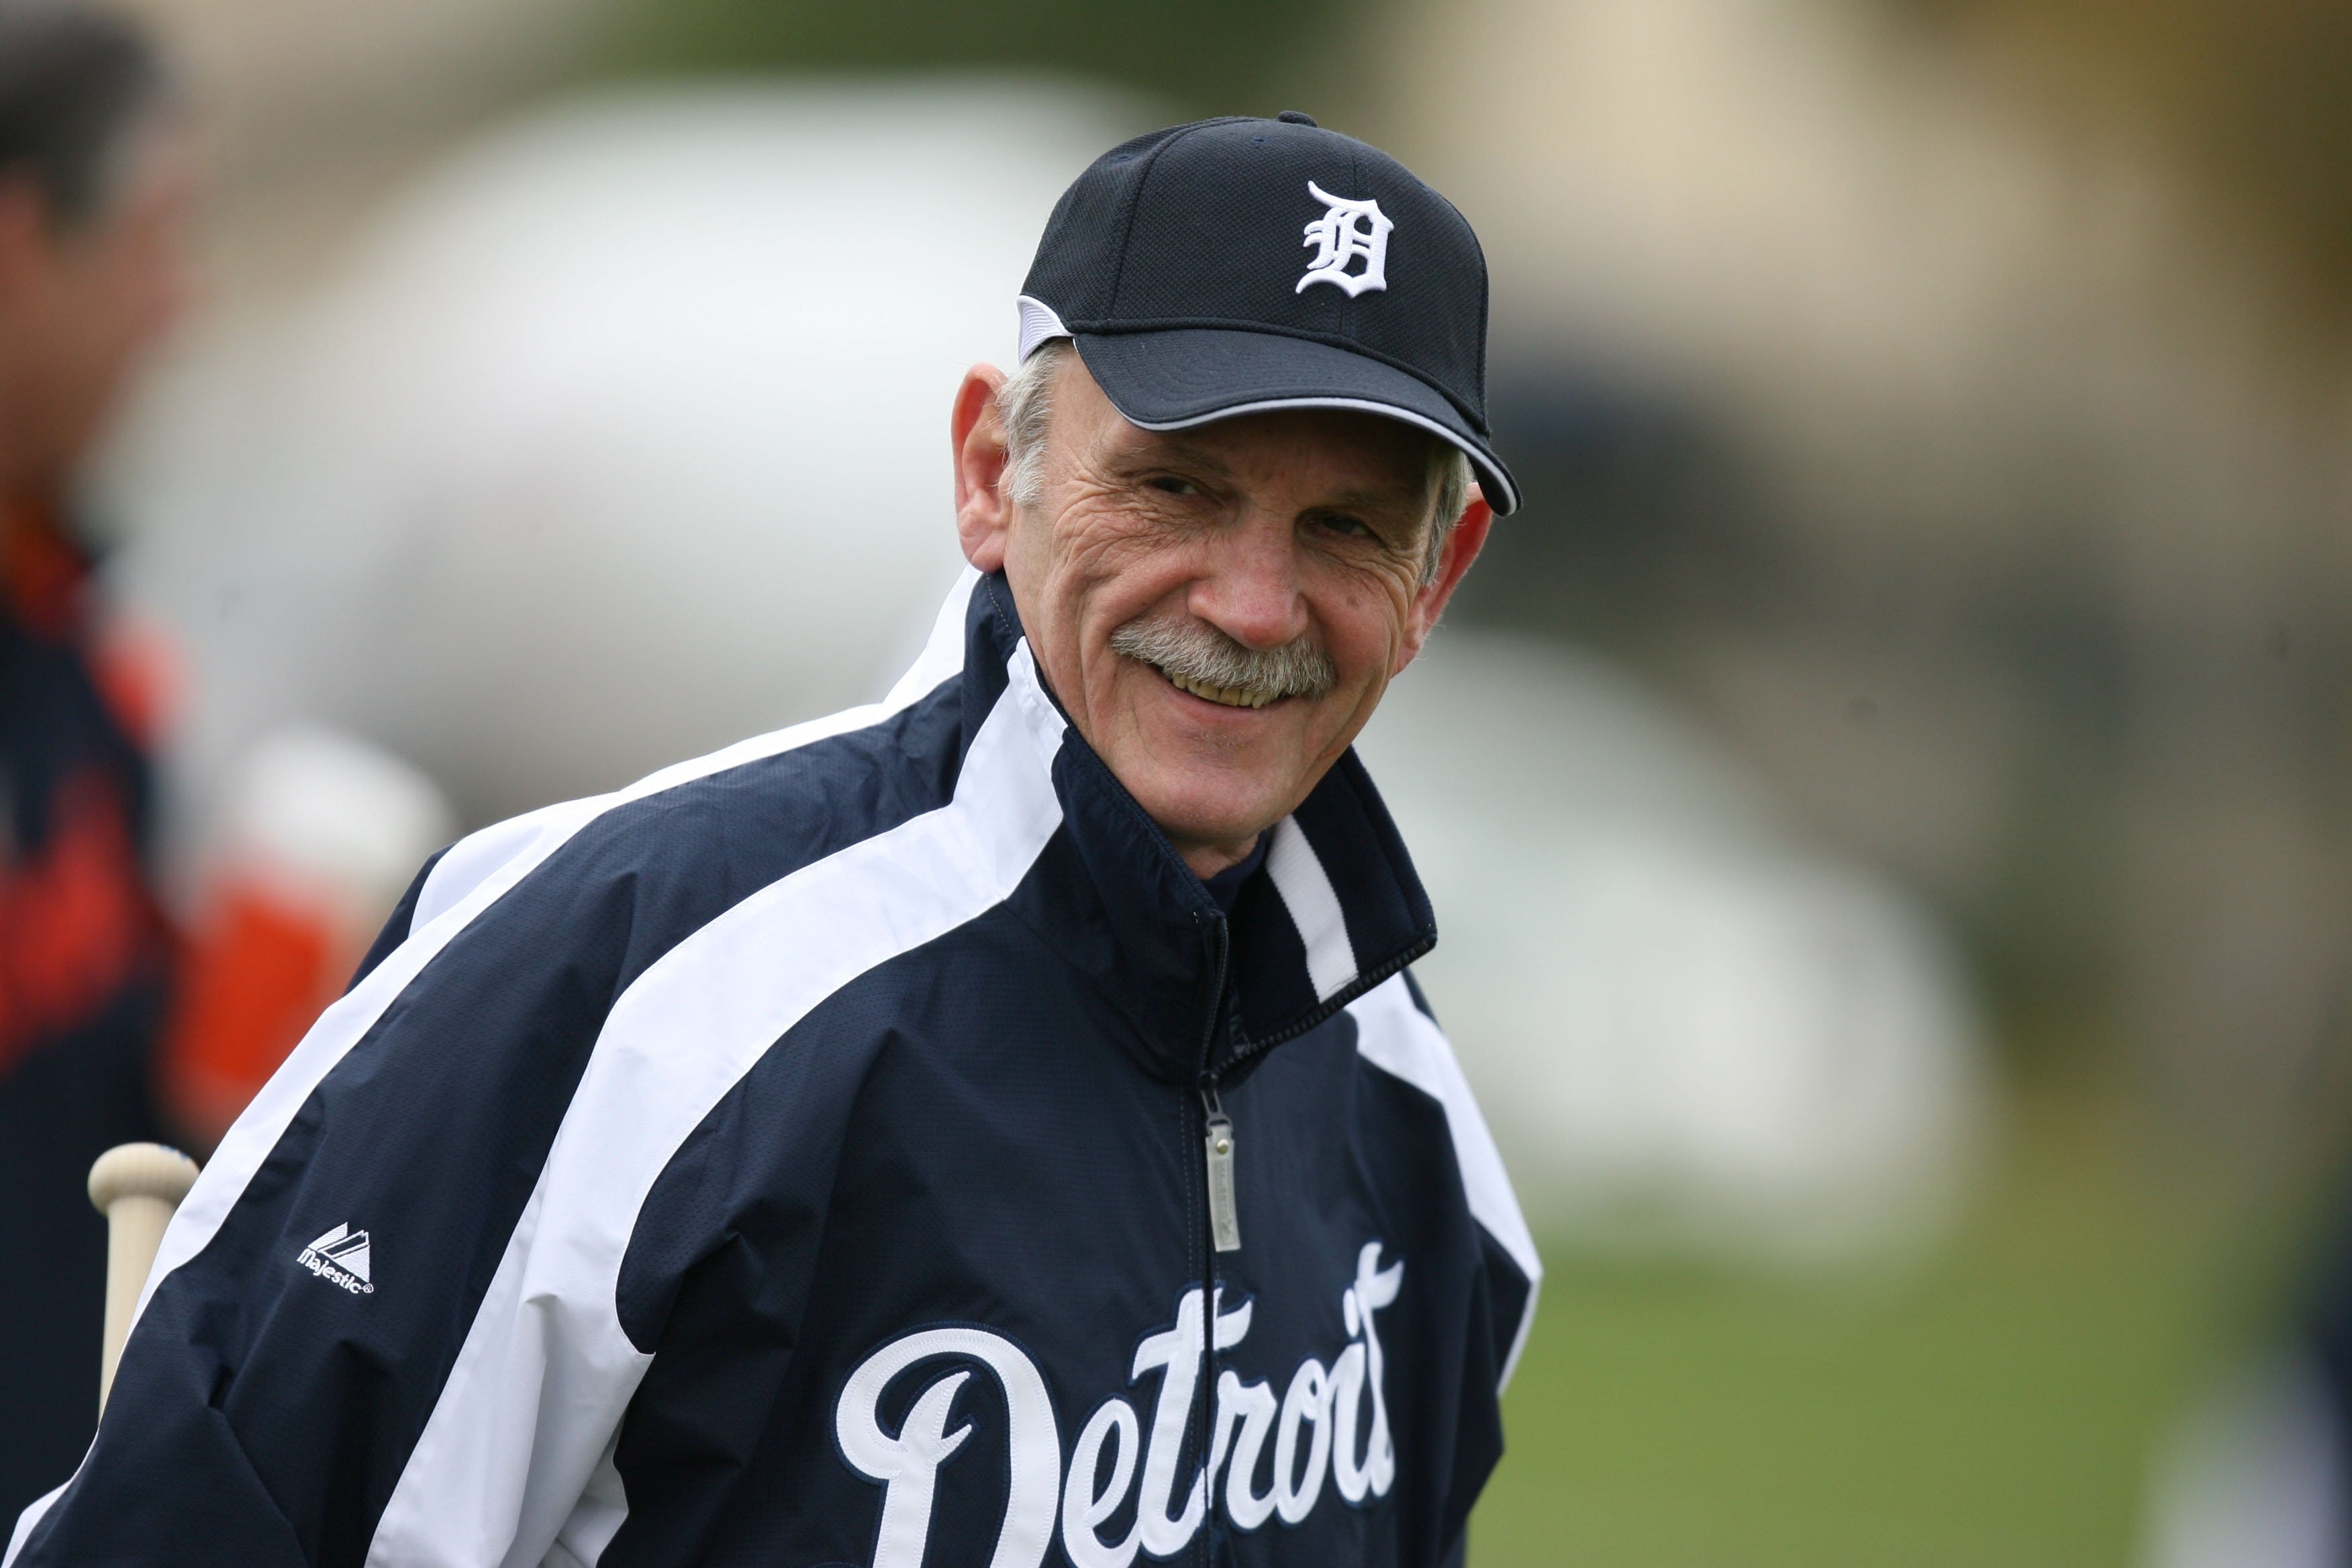 Tigers Manager Jim Leyland on the first day of Tiger Spring Training in Lakeland, Florida on Friday February 16, 2007. 